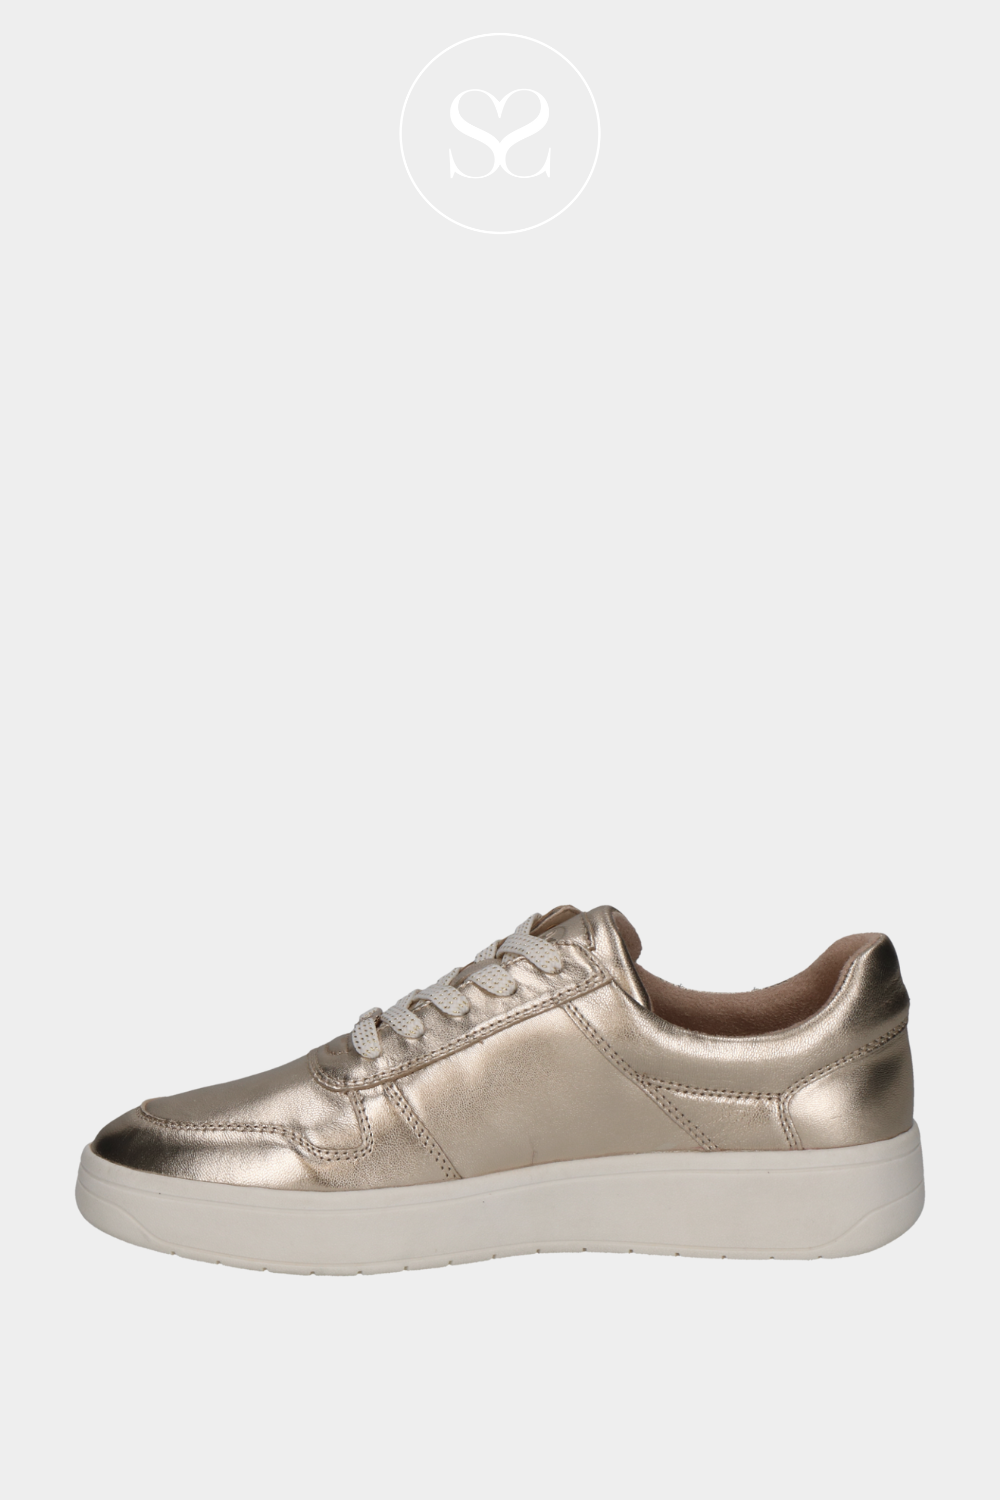 CAPRICE 9-23301-42 GOLD METALLIC LEATHER TRAINERS WITH ZIP AND LACE FASTENING. ON A WHITE SOLE. REMOVABLE INSOLE AND SUITABLE FOR WALKING.